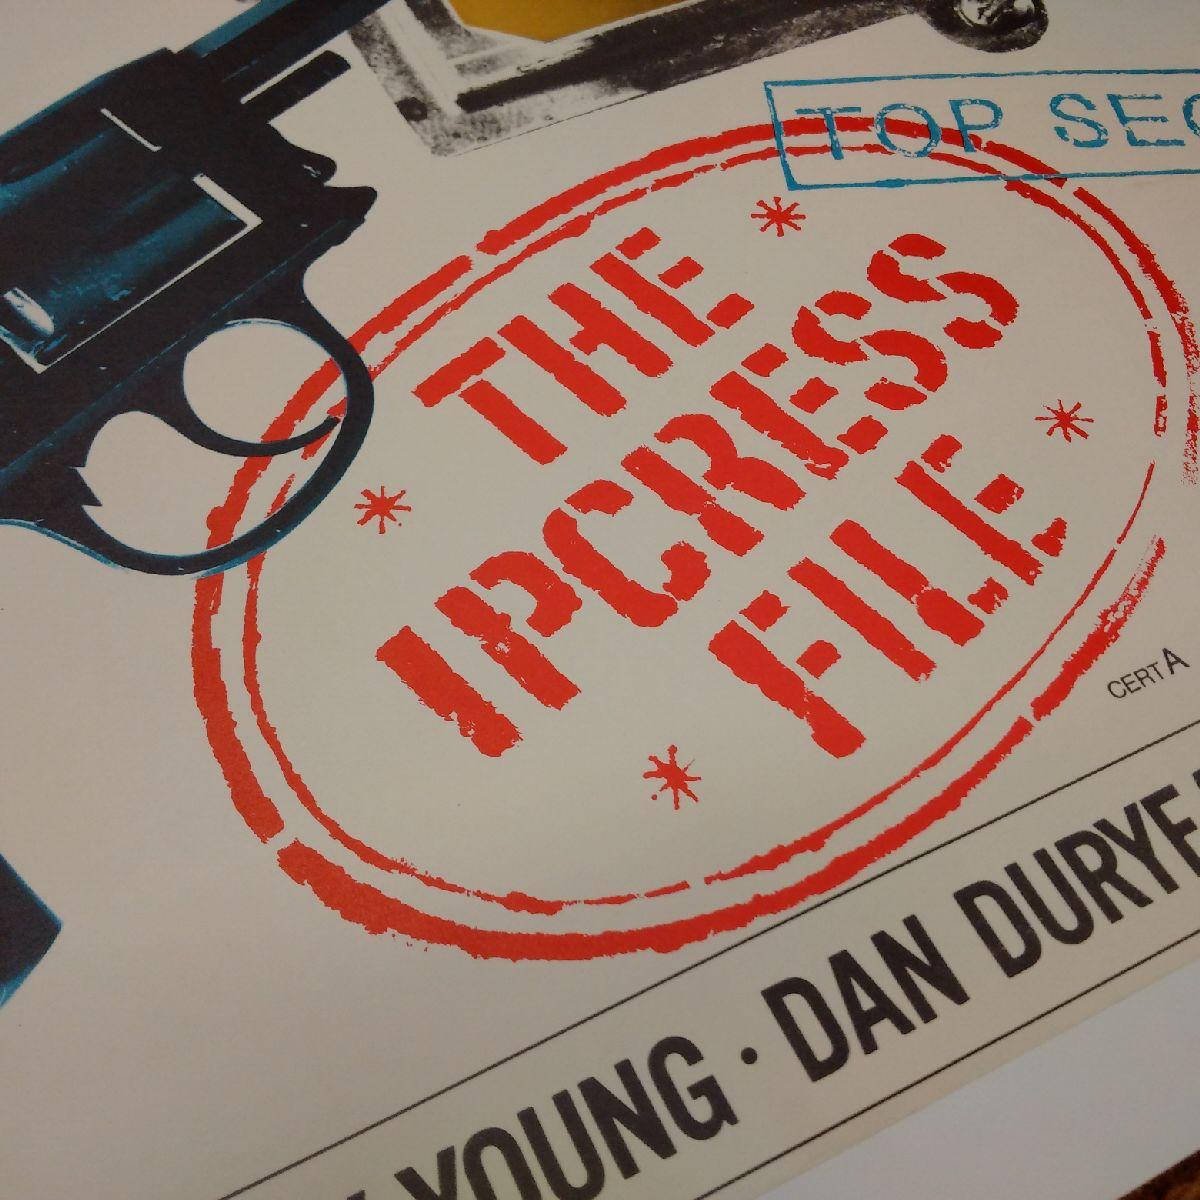 British Original Film Poster for 'The Ipcress File' Starring Michael Caine, Dated 1965